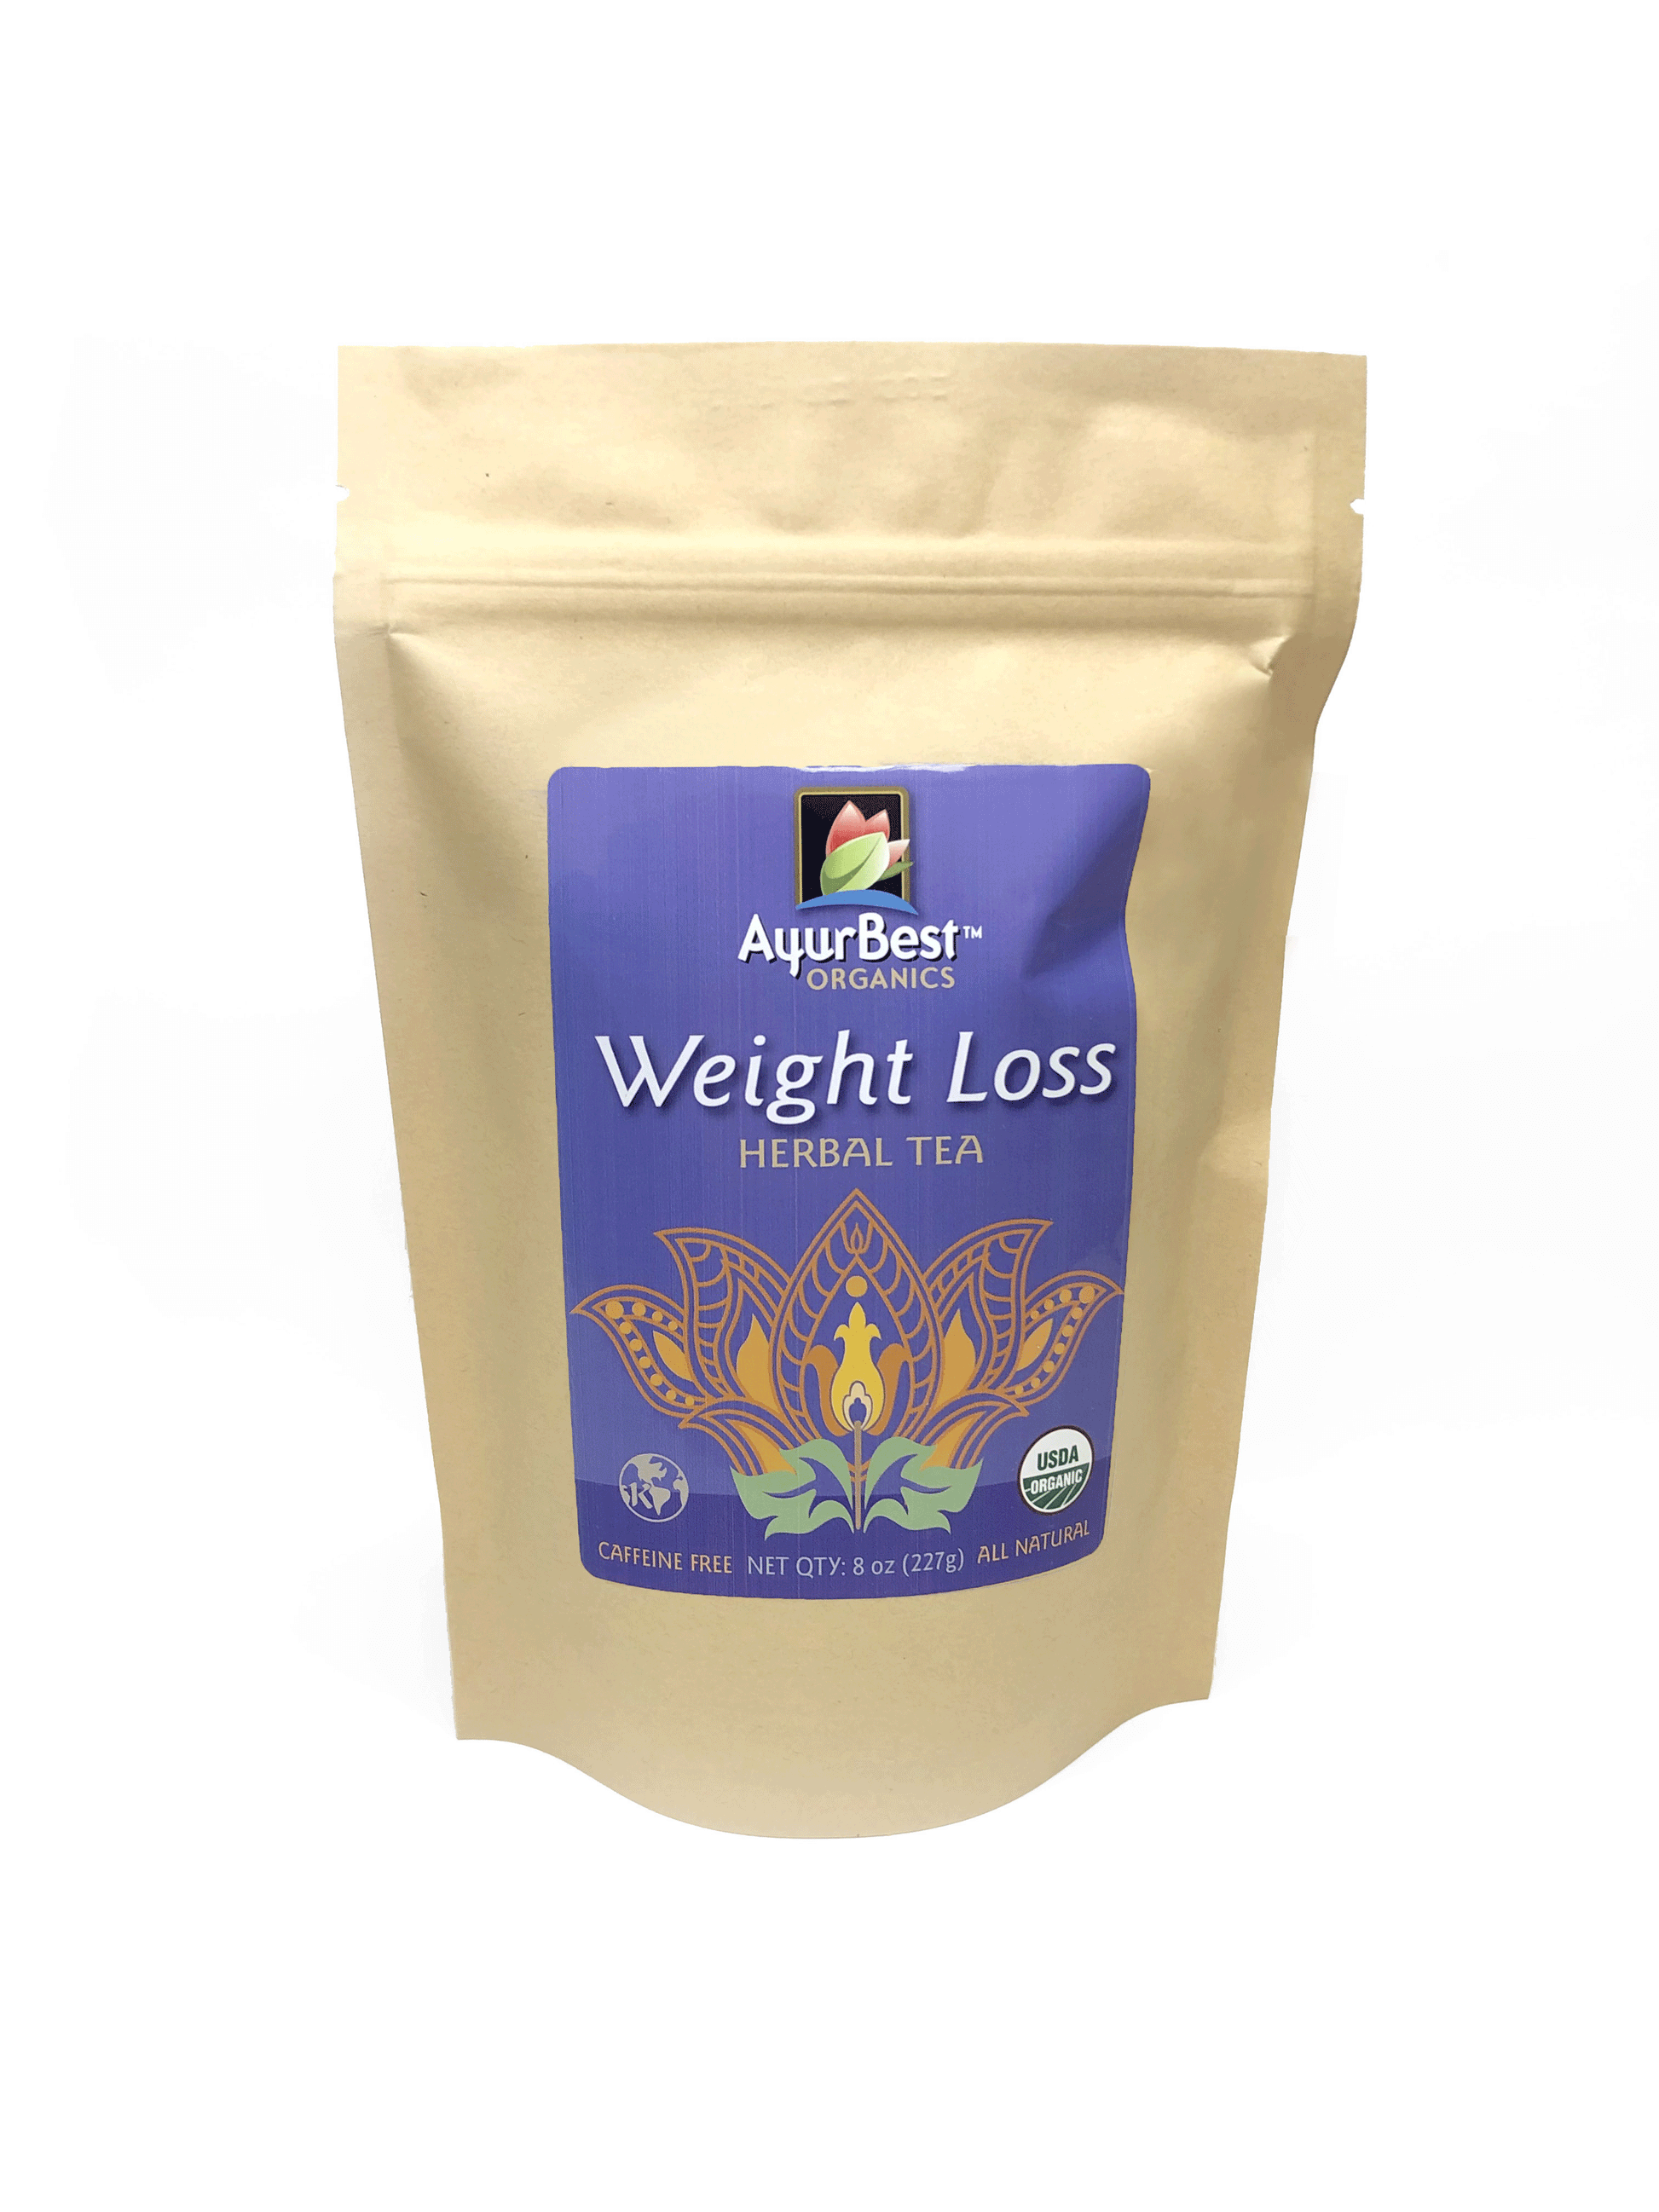 Organic Weight Loss Herbal Tea available in 8oz size.